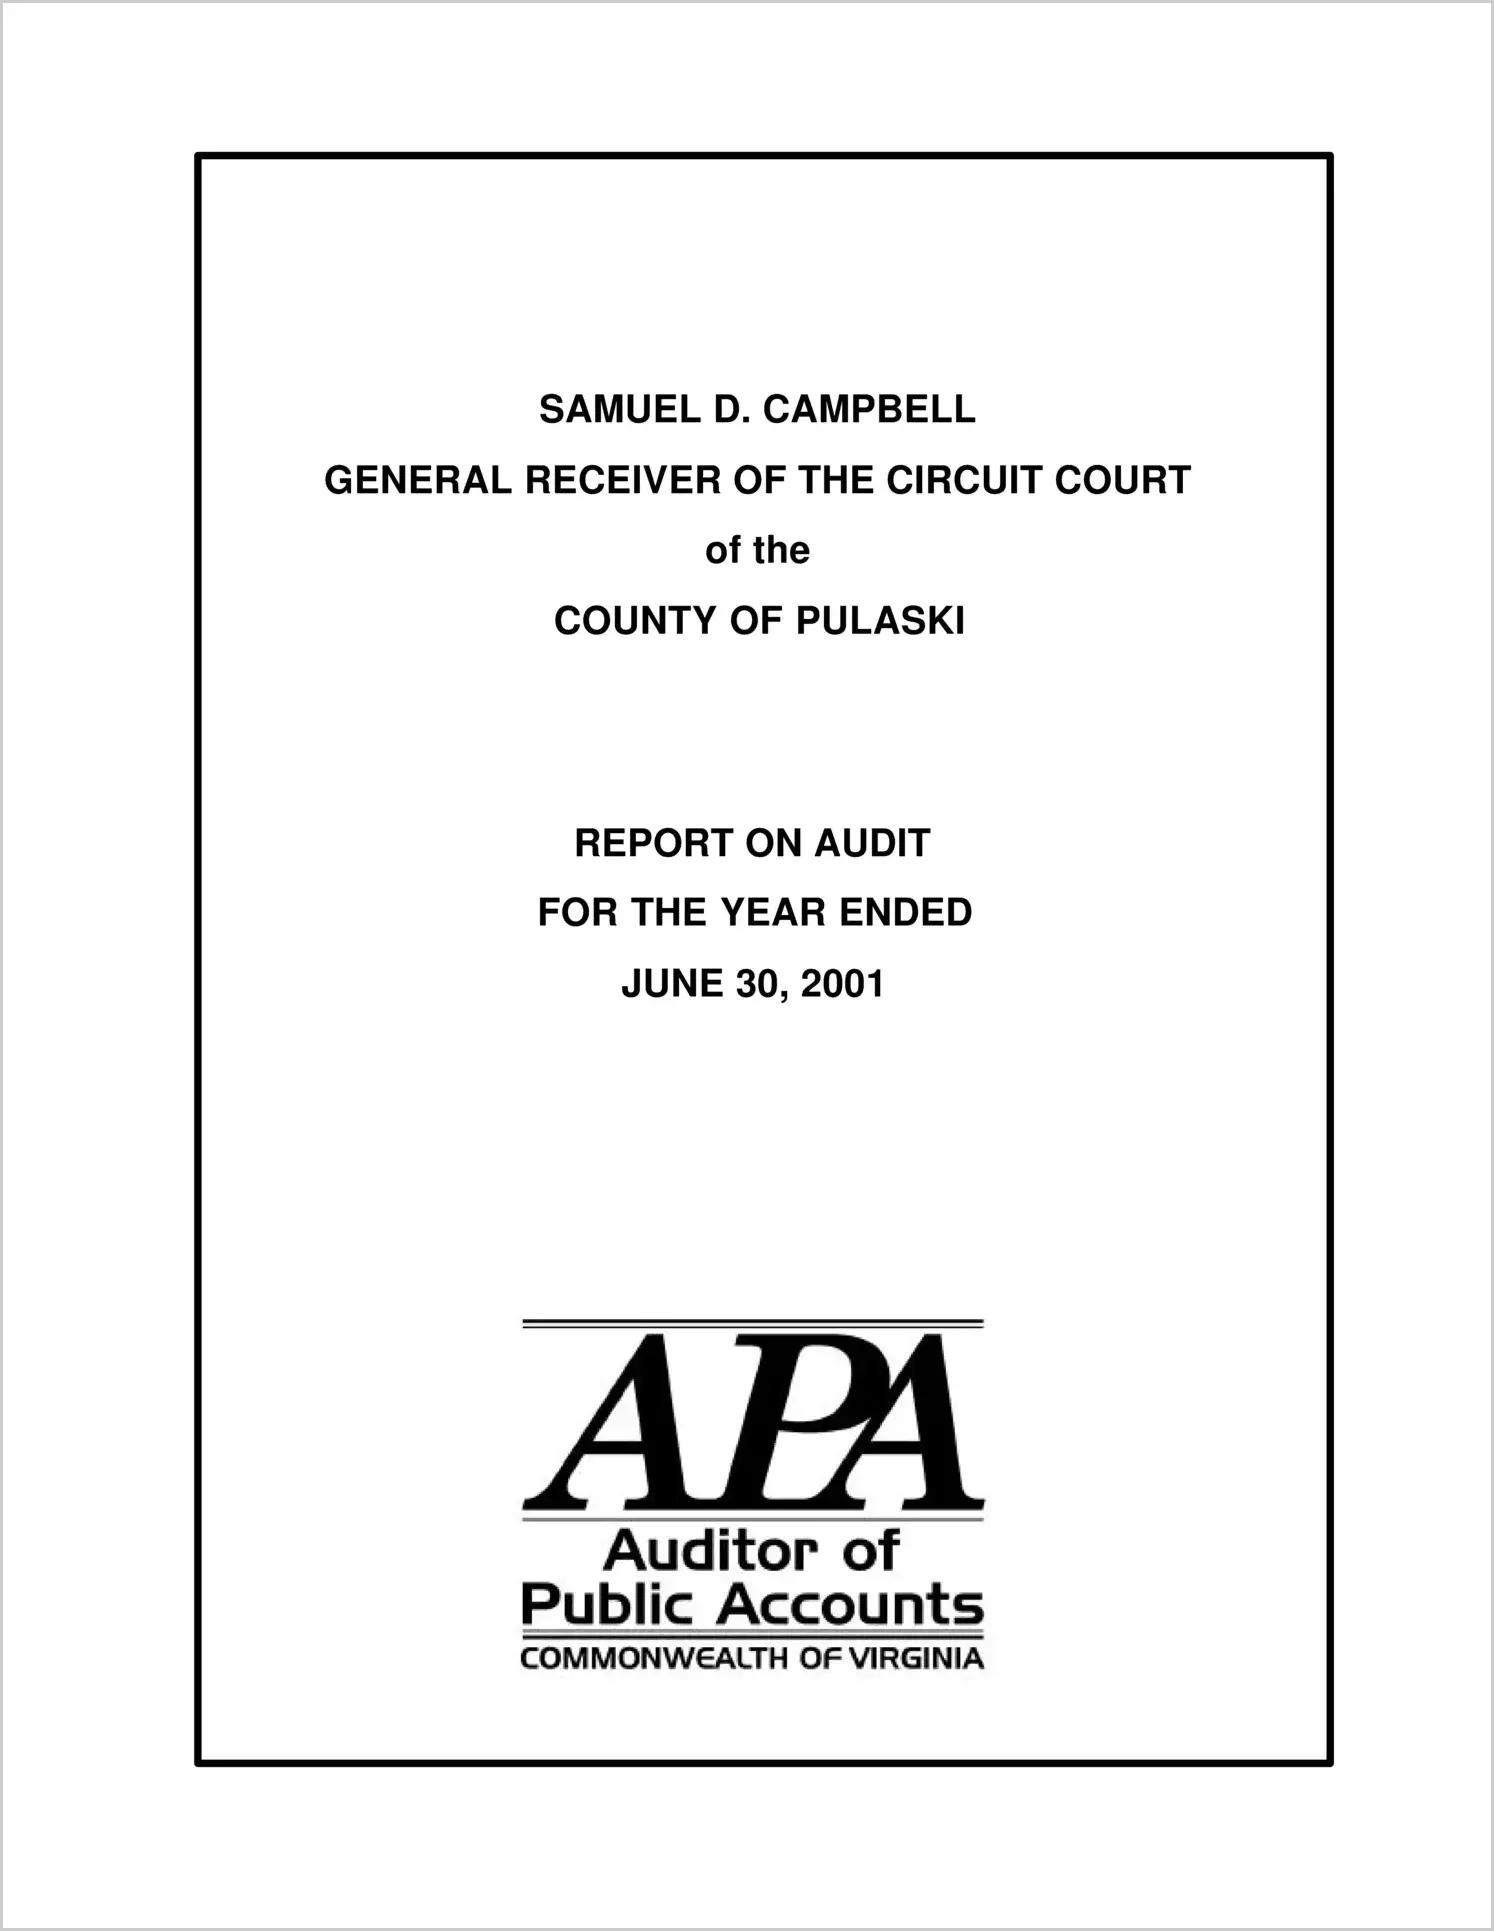 General Receiver of the Circuit Court of the County of Pulaski for the year ended June 30, 2001